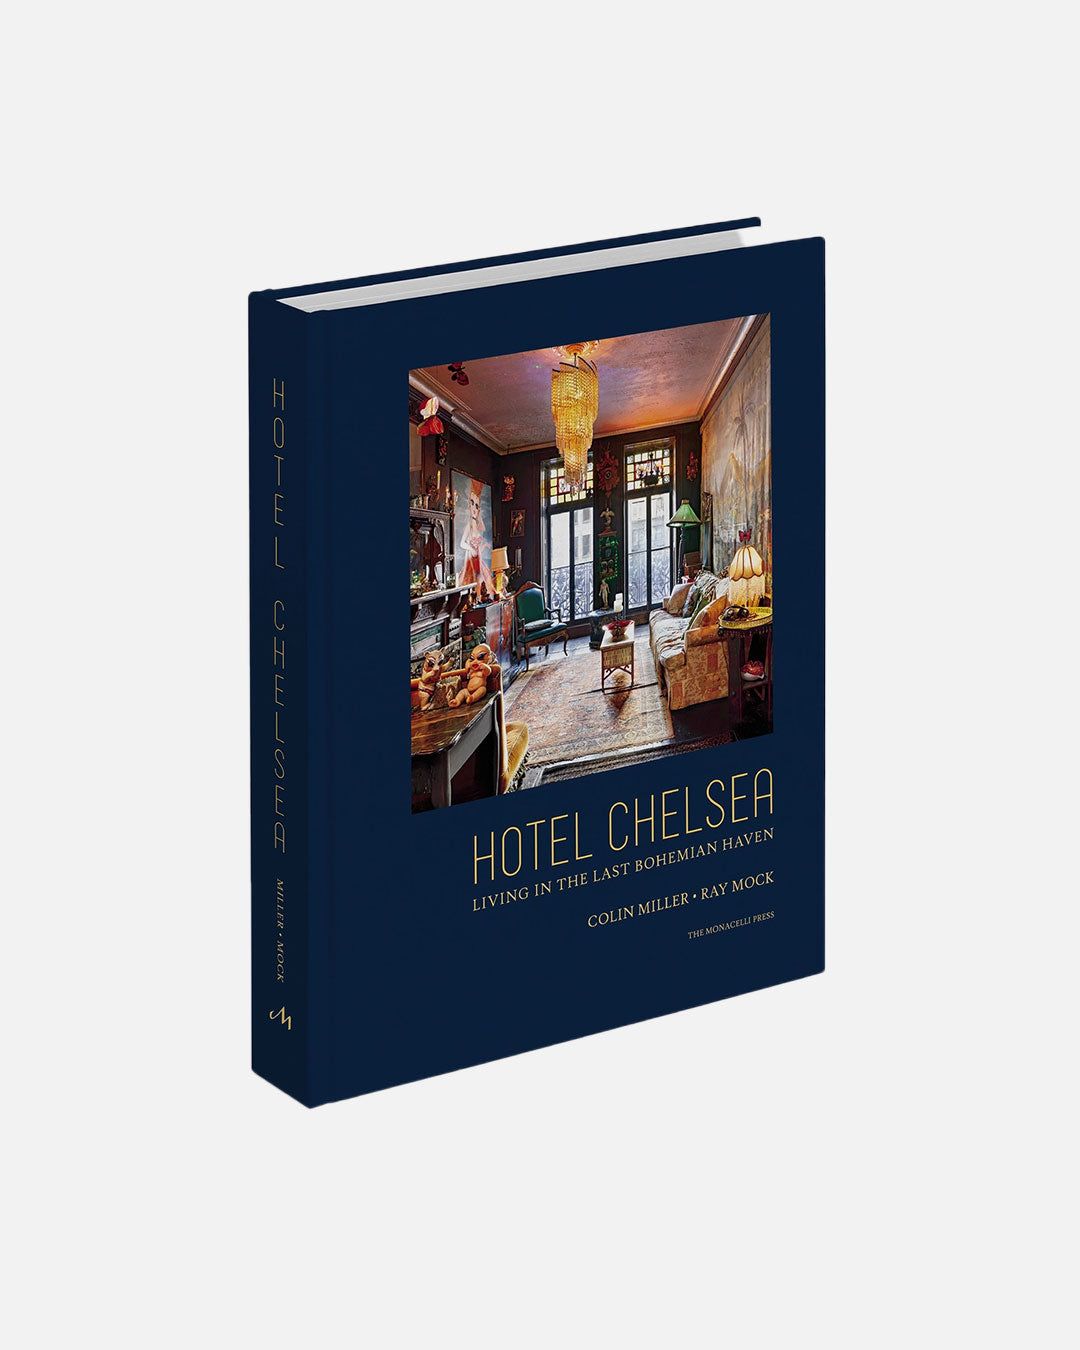 Hotel Chelsea: Living in the Last Bohemian Haven by Colin Miller and Ray Mock